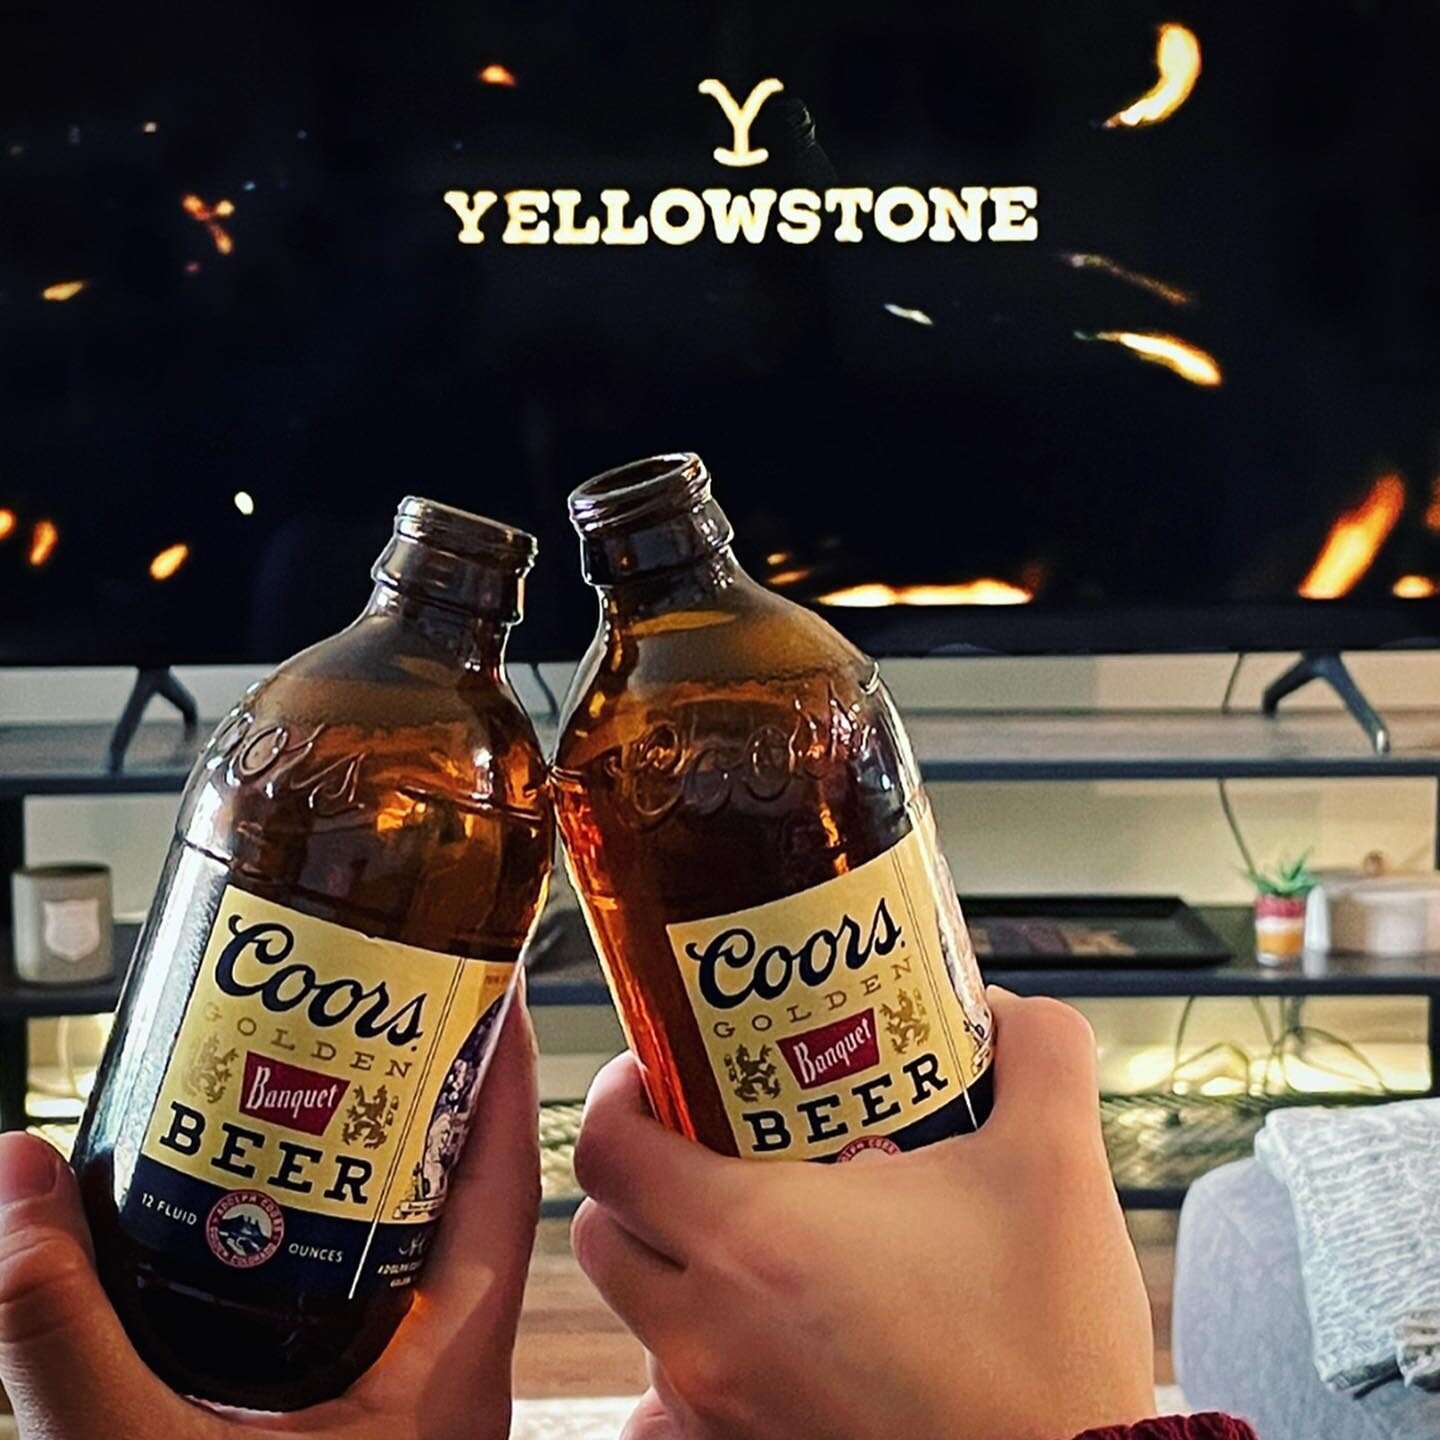 So who else is having a hard time waiting for the next @yellowstone episode? Be sure to restock your bunkhouse with plenty of @coorsbanquet ahead of this long holiday weekend so you don't run out before Sunday!